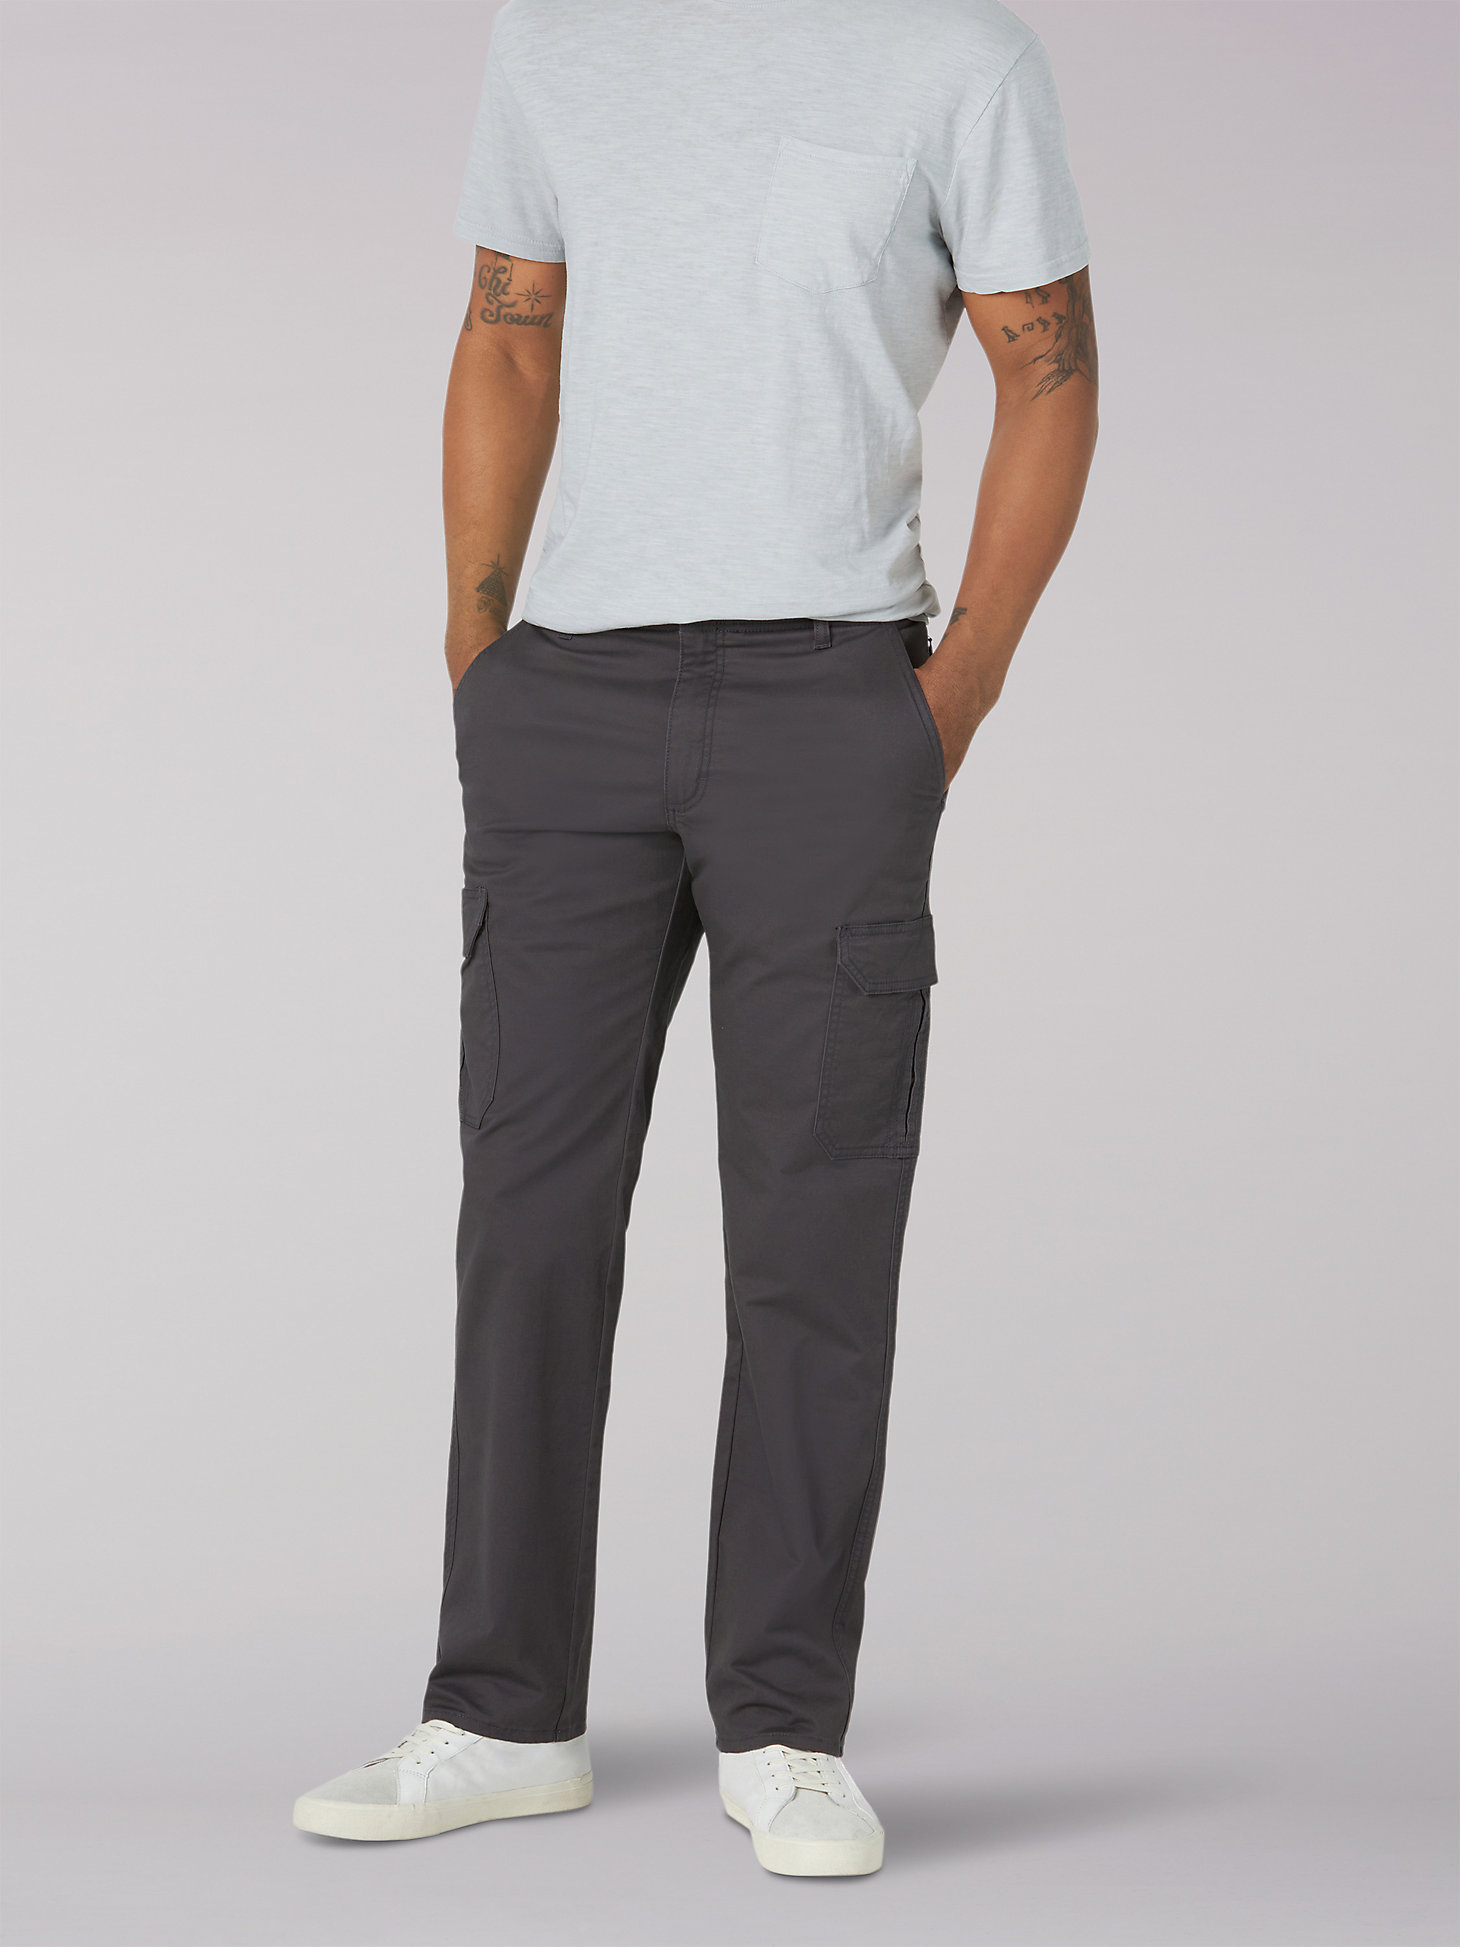 Men's Extreme Comfort Cargo Twill Pant in Charcoal main view